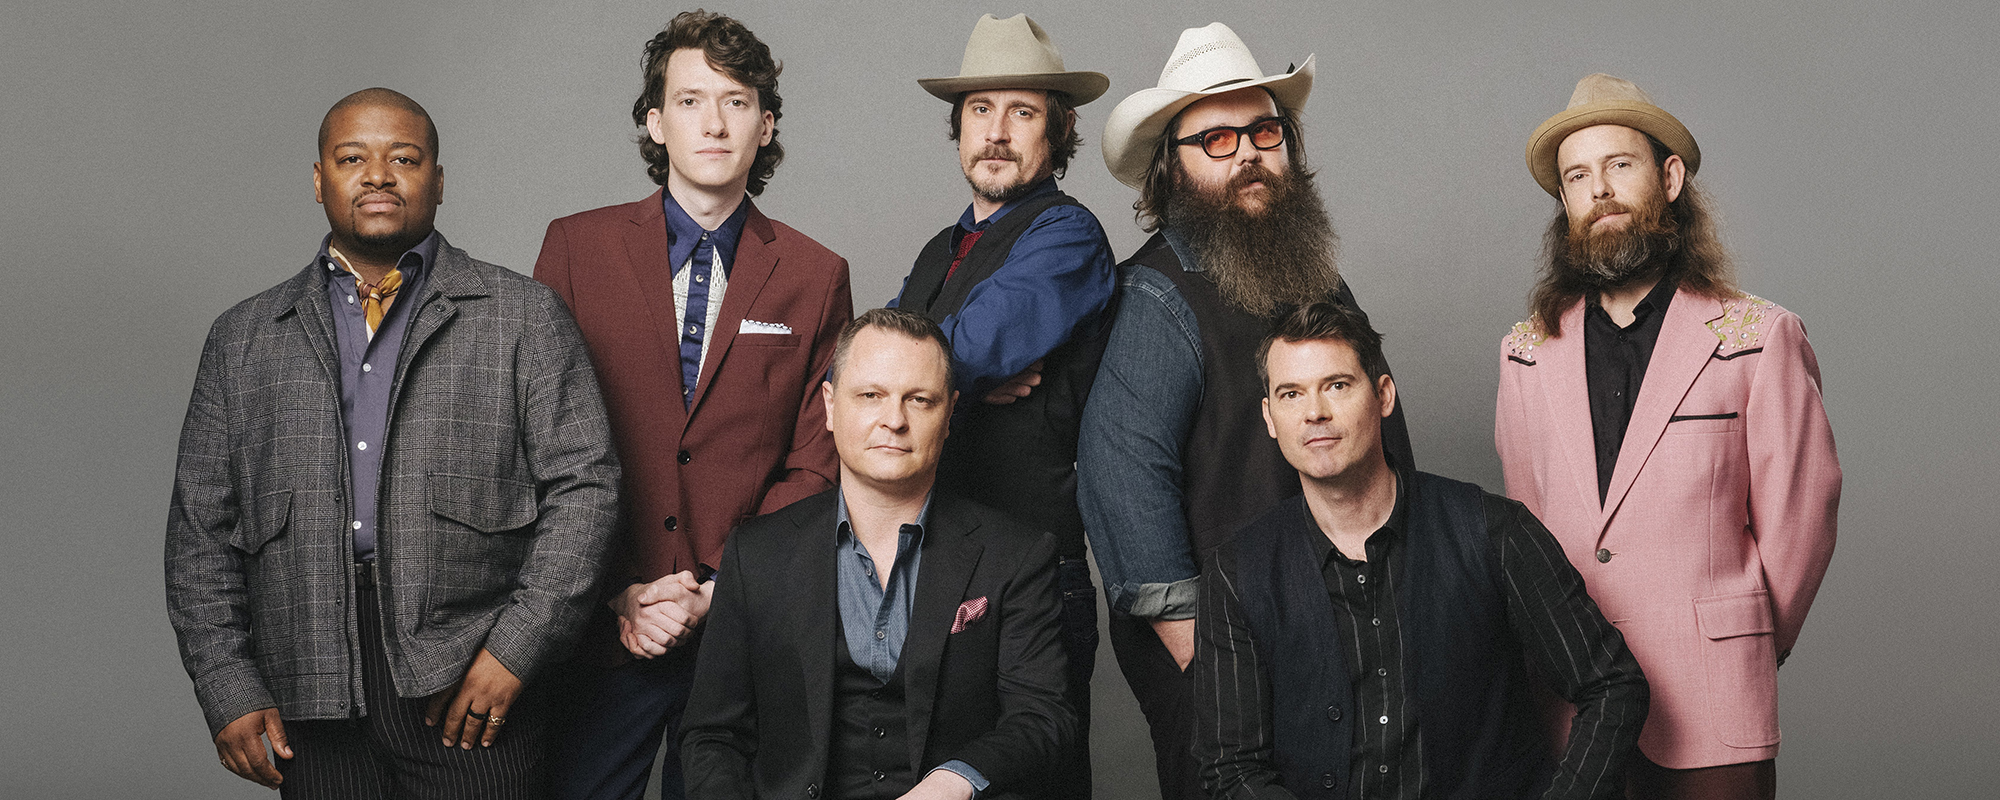 Behind the Traveling Band Name: Old Crow Medicine Show